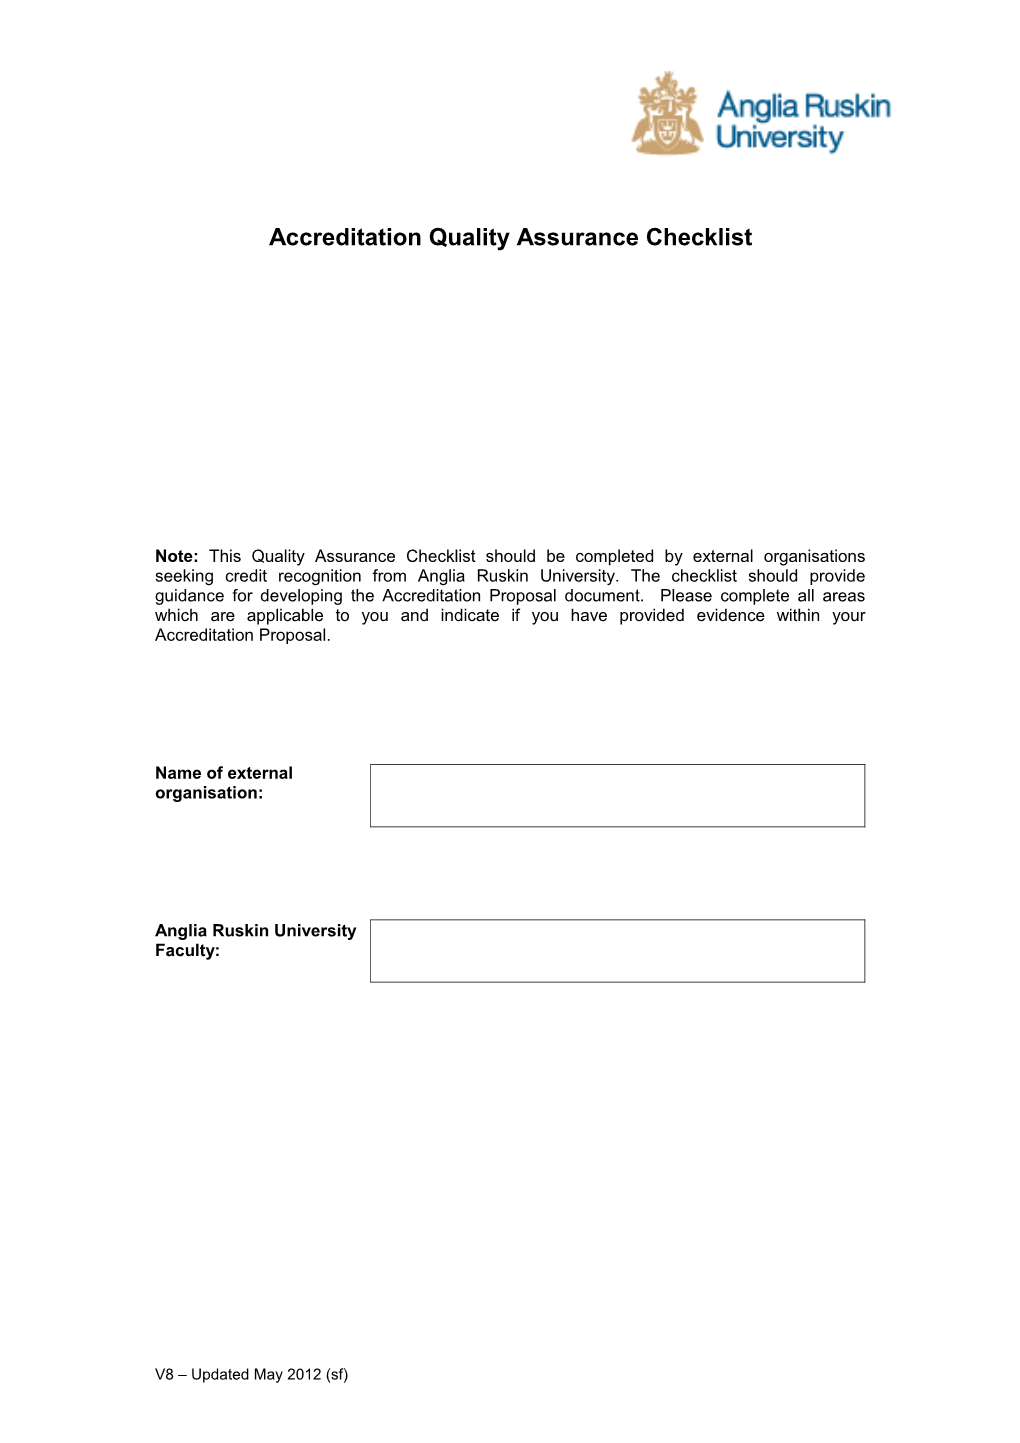 Quality Assurance Check List for Organisations Seeking Credit Recognition Agreement